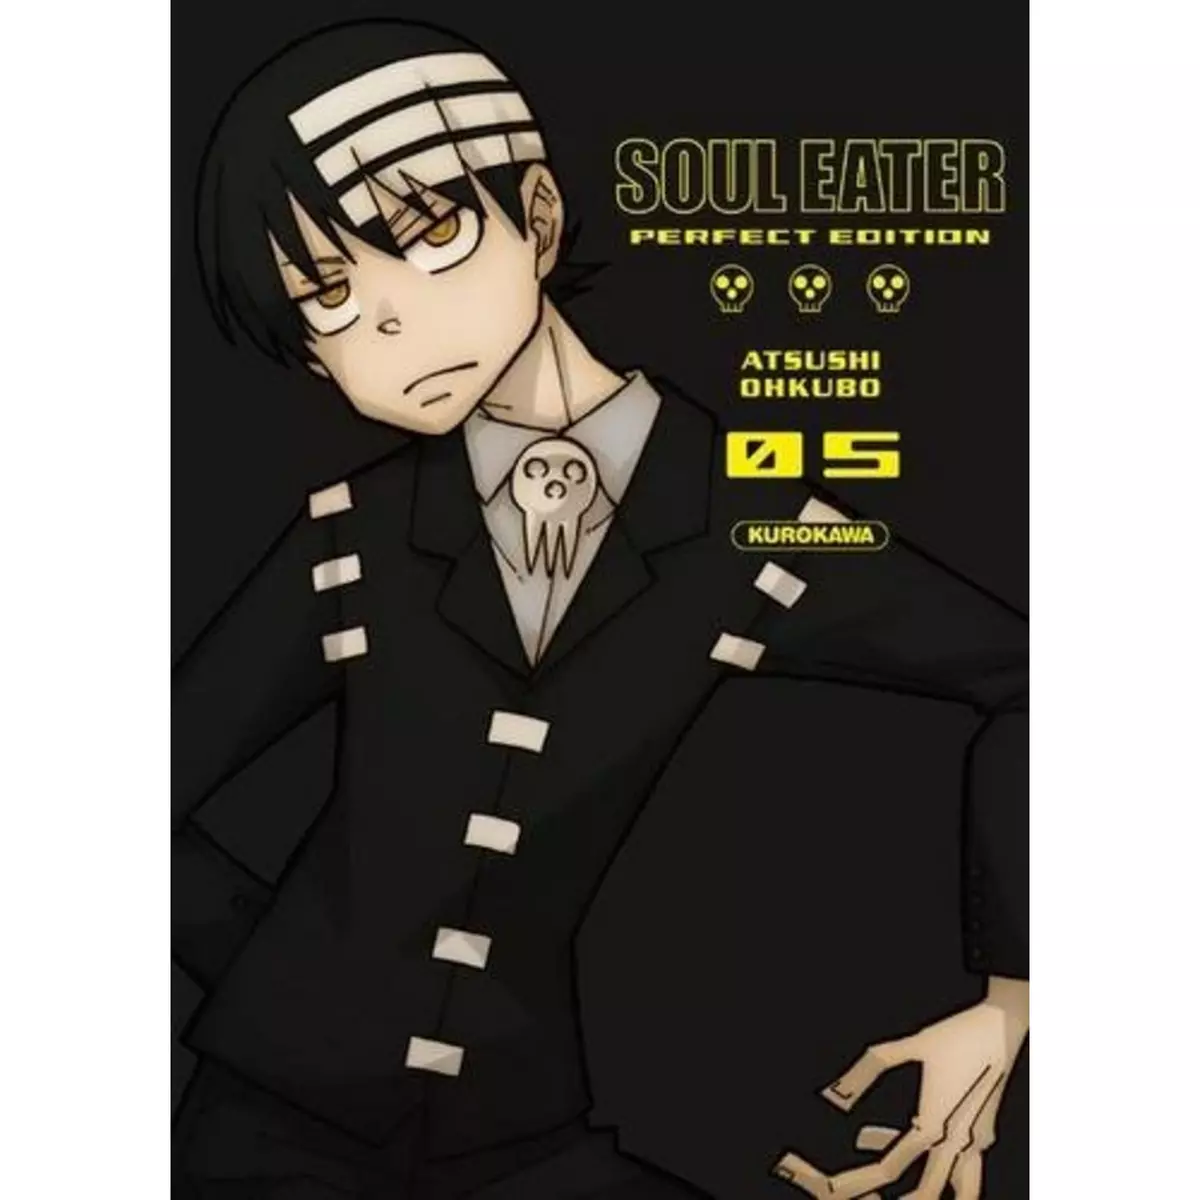  SOUL EATER TOME 5 : PERFECT EDITION. EDITION COLLECTOR, Ohkubo Atsushi